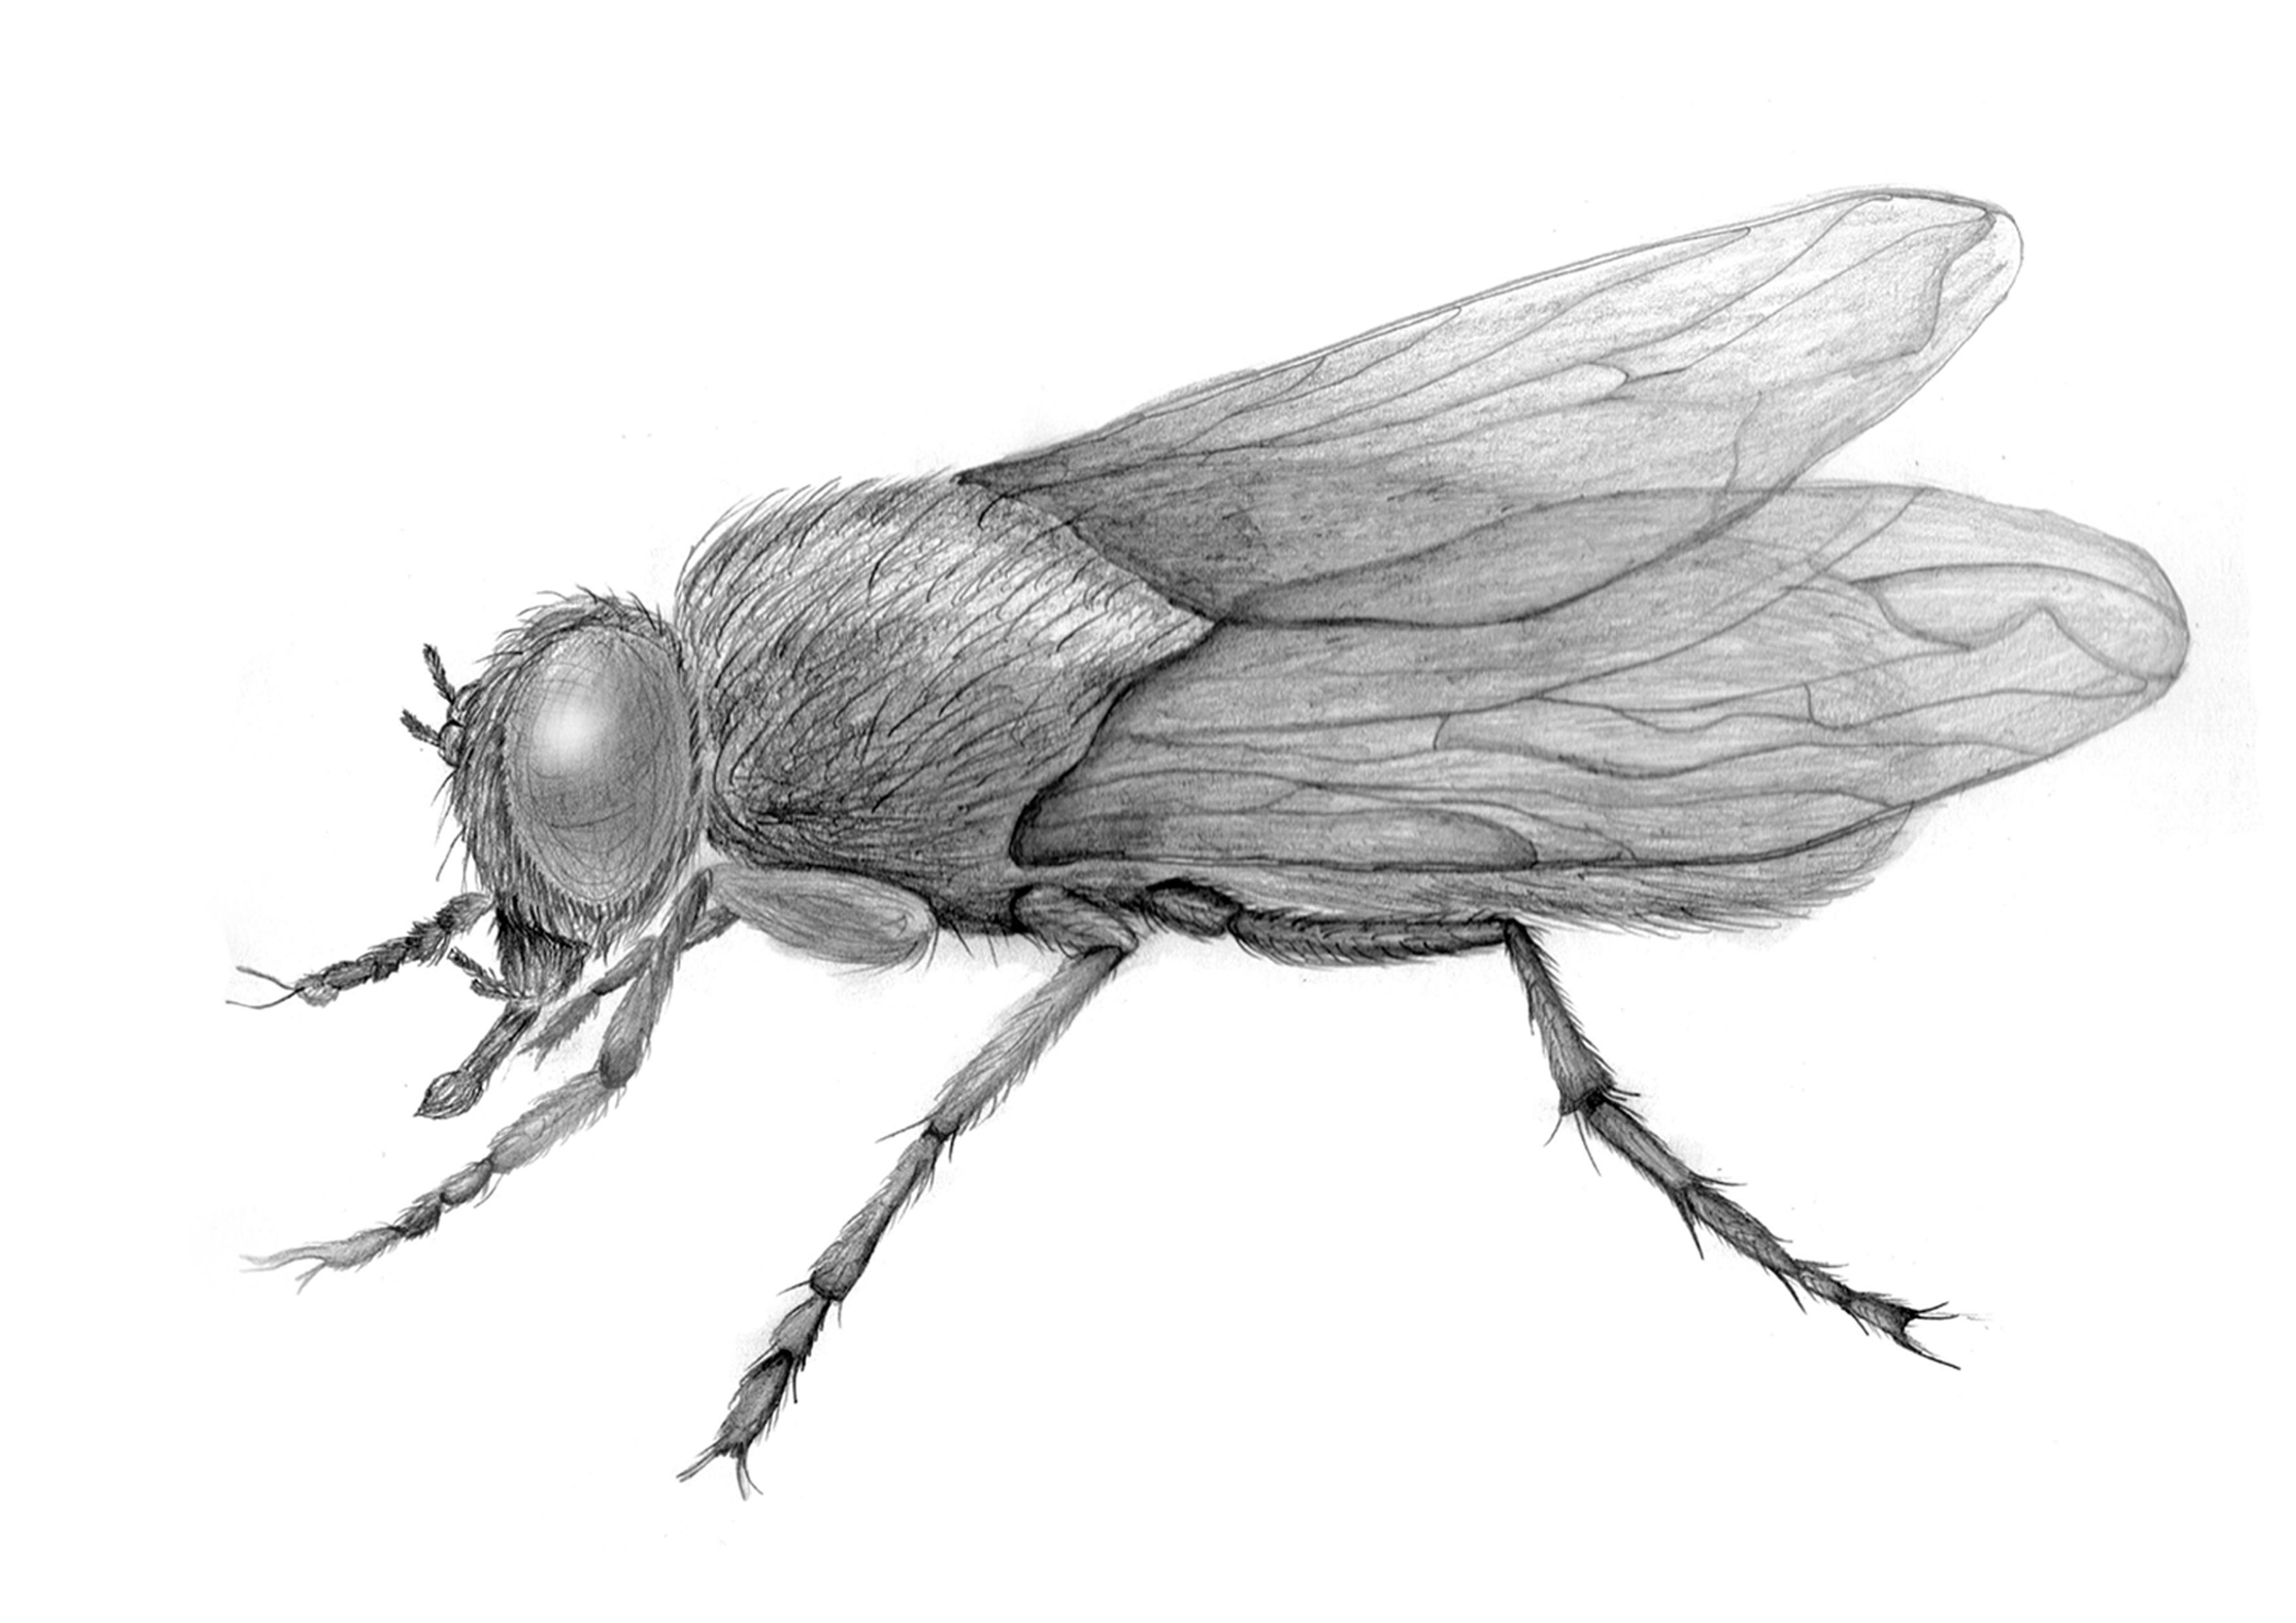 pencil drawing of a fly insect sketch.